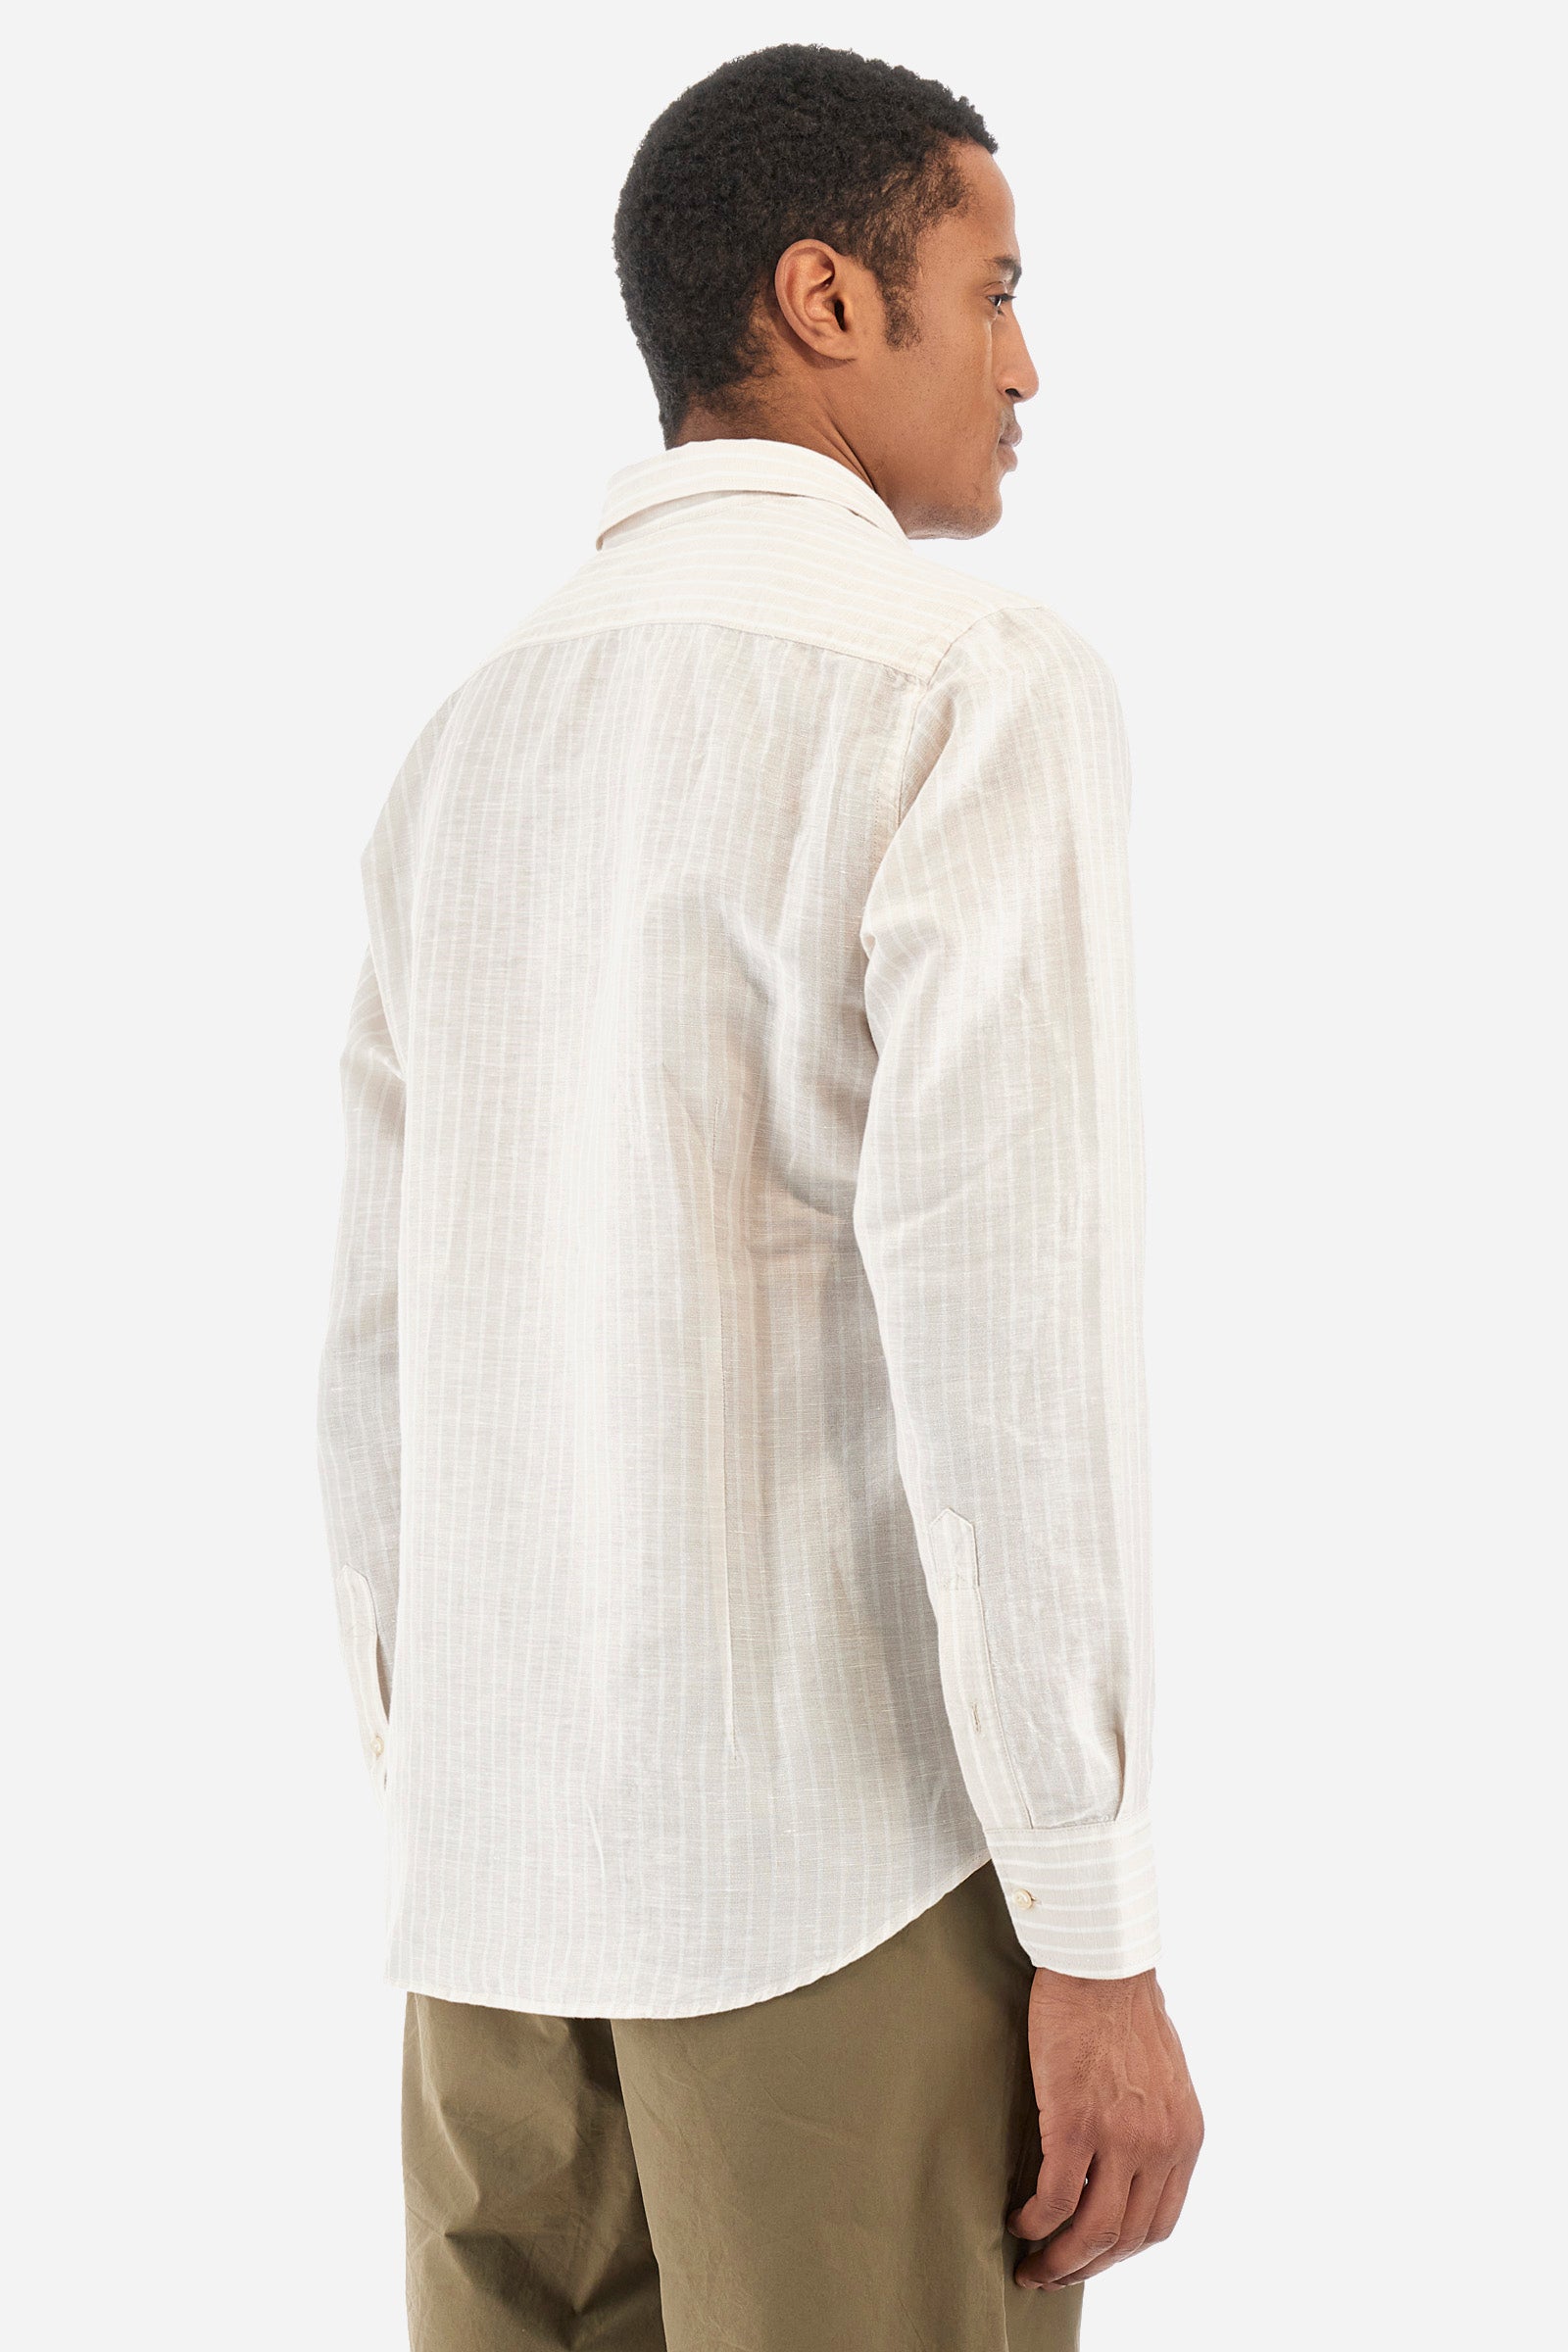 Striped patterned shirt in cotton and linen - Innocent